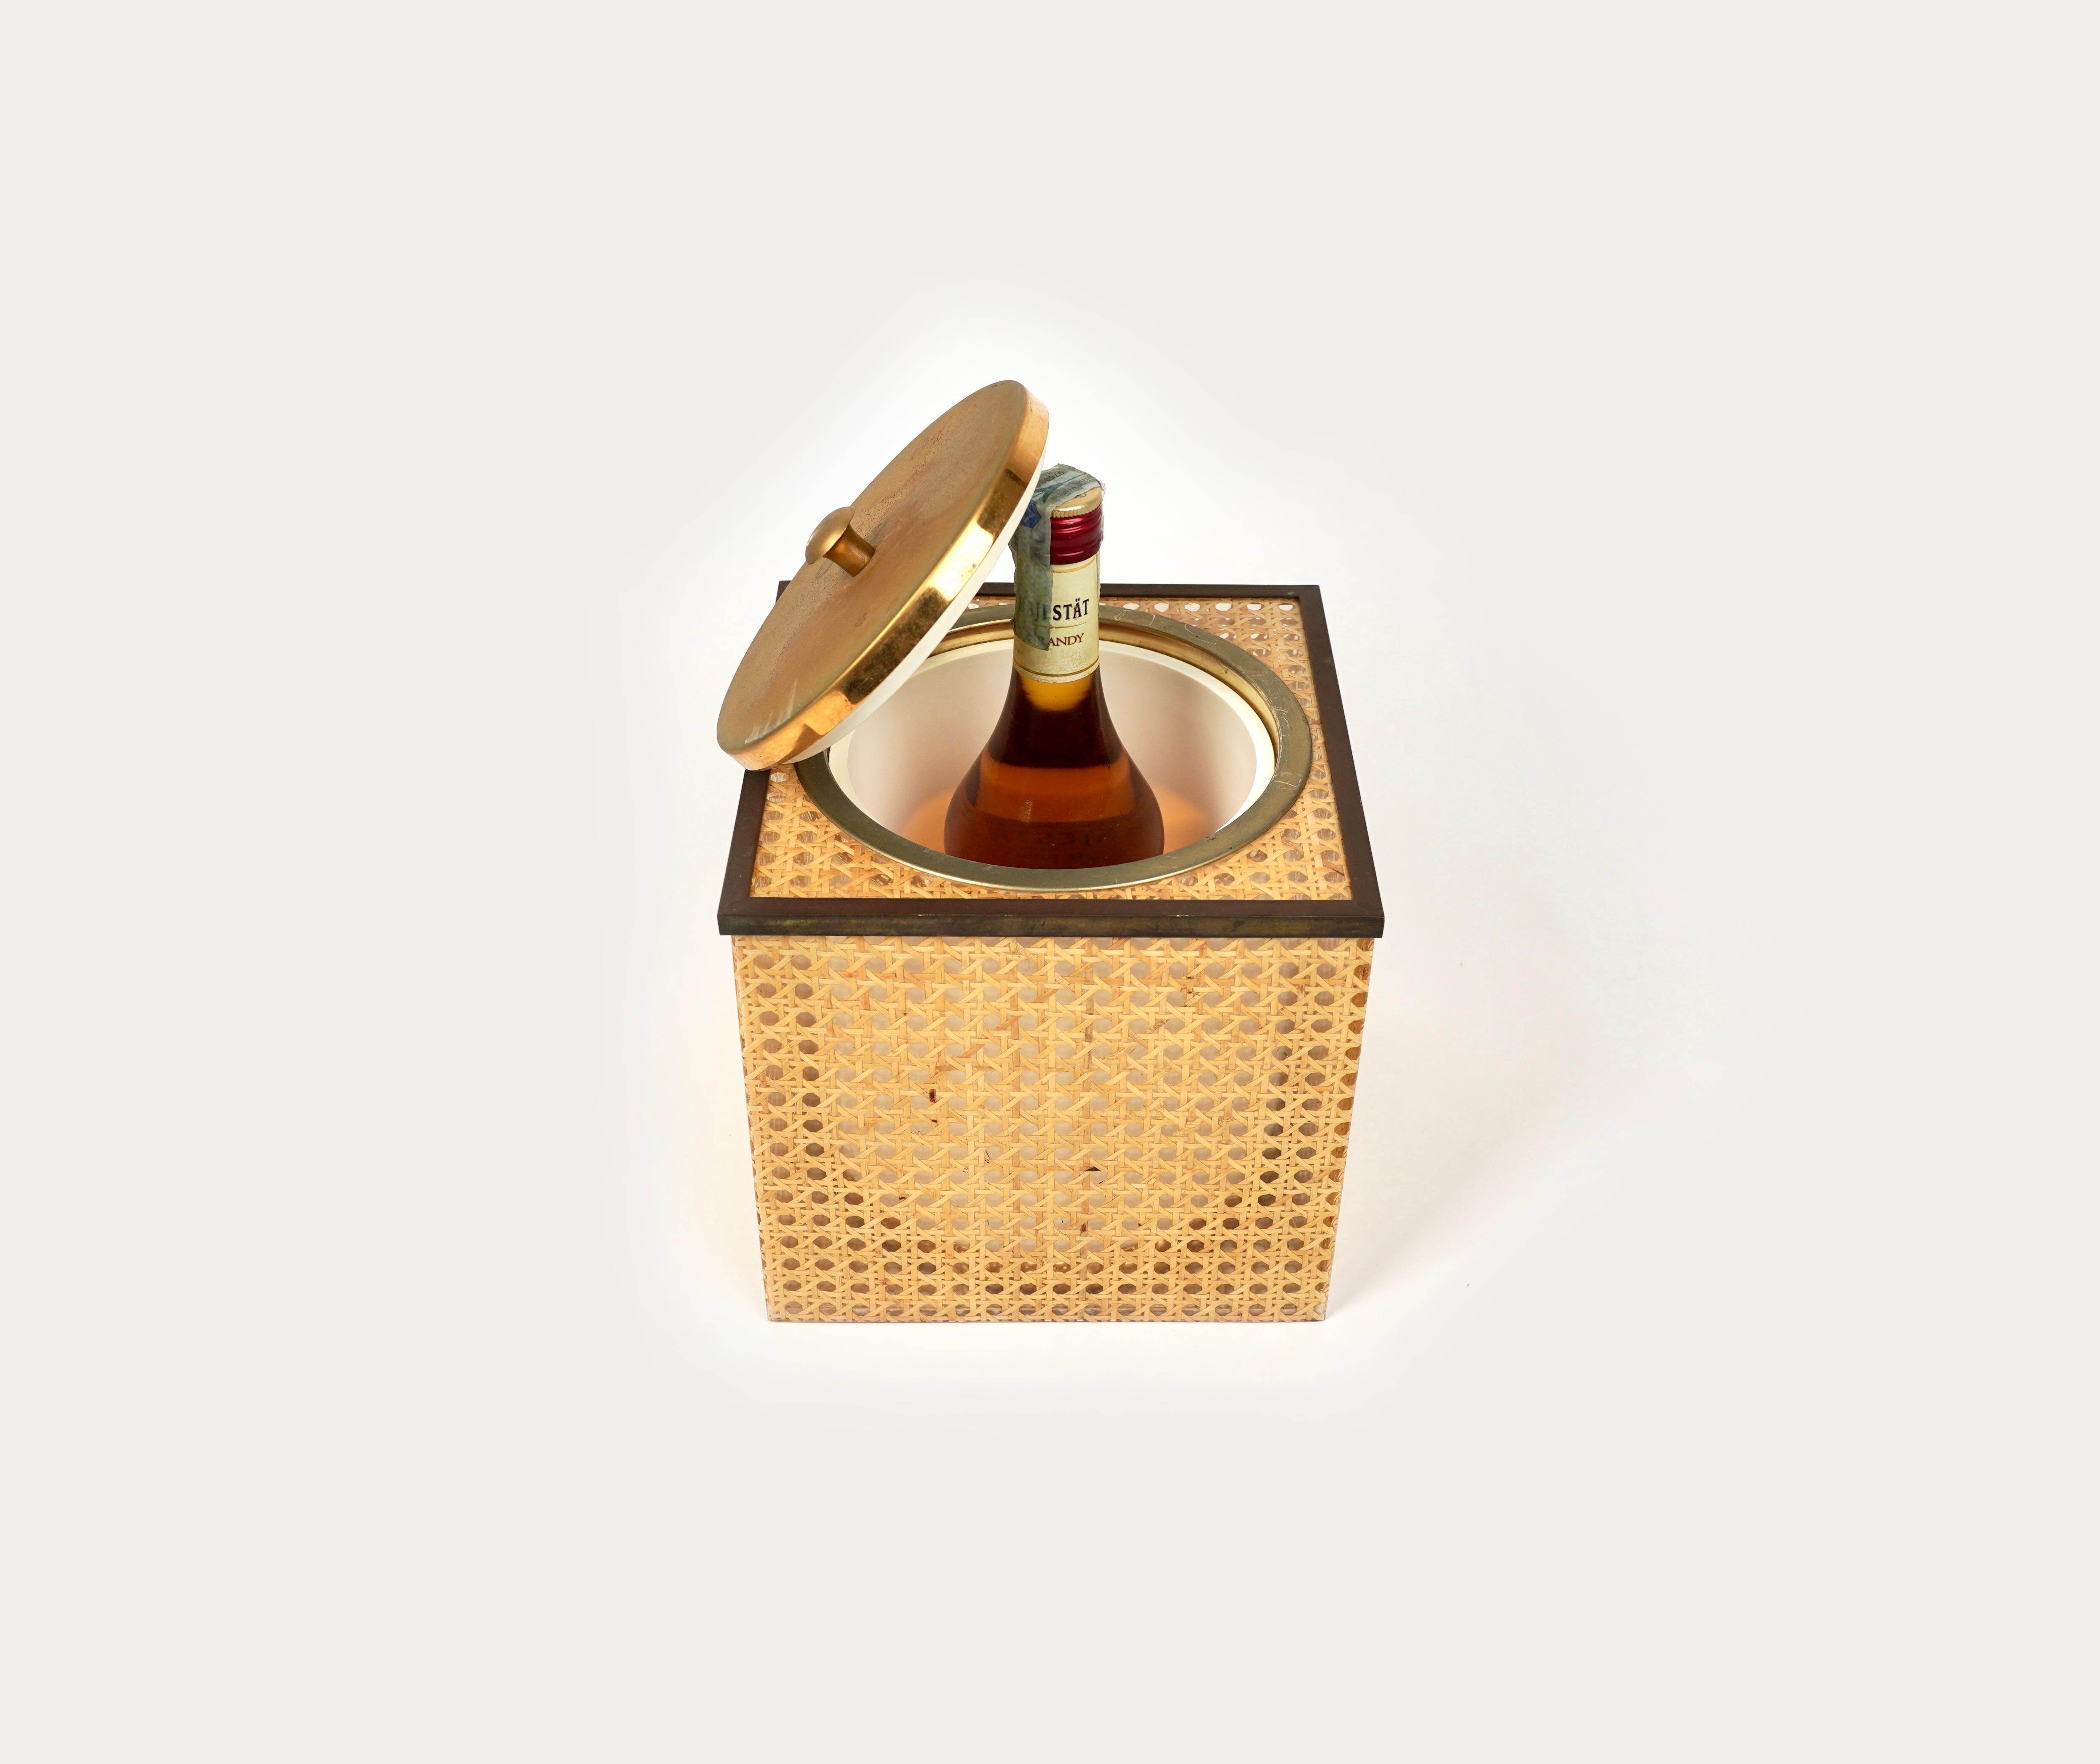 Cube Ice Bucket in Lucite, Rattan and Brass Christian Dior Style, Italy, 1970s For Sale 3